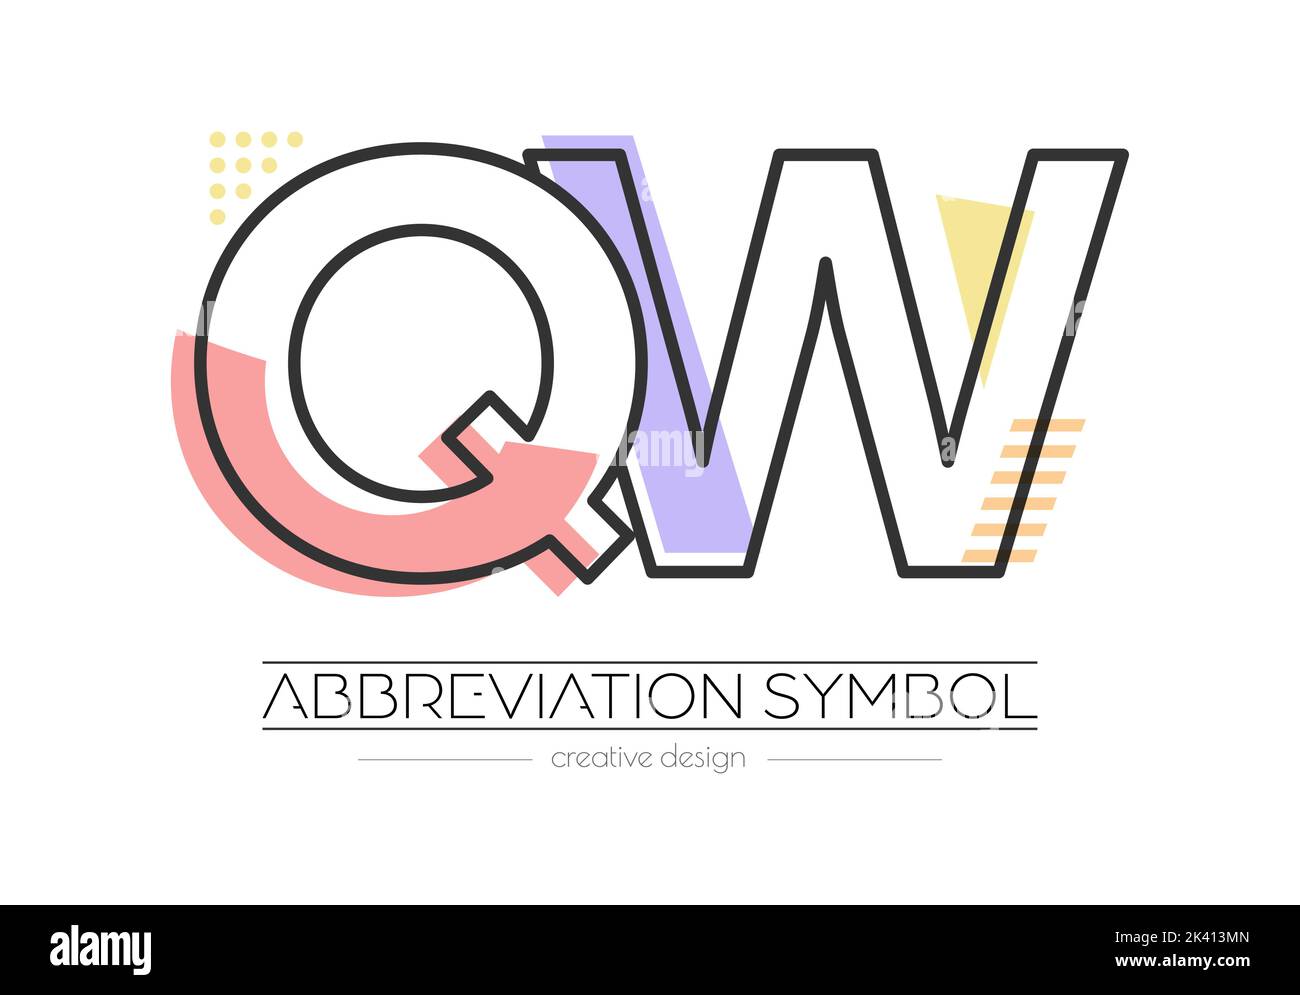 Letters Q and W. Merging of two letters. Initials logo or abbreviation symbol. Vector illustration for creative design and creative ideas. Flat style. Stock Vector